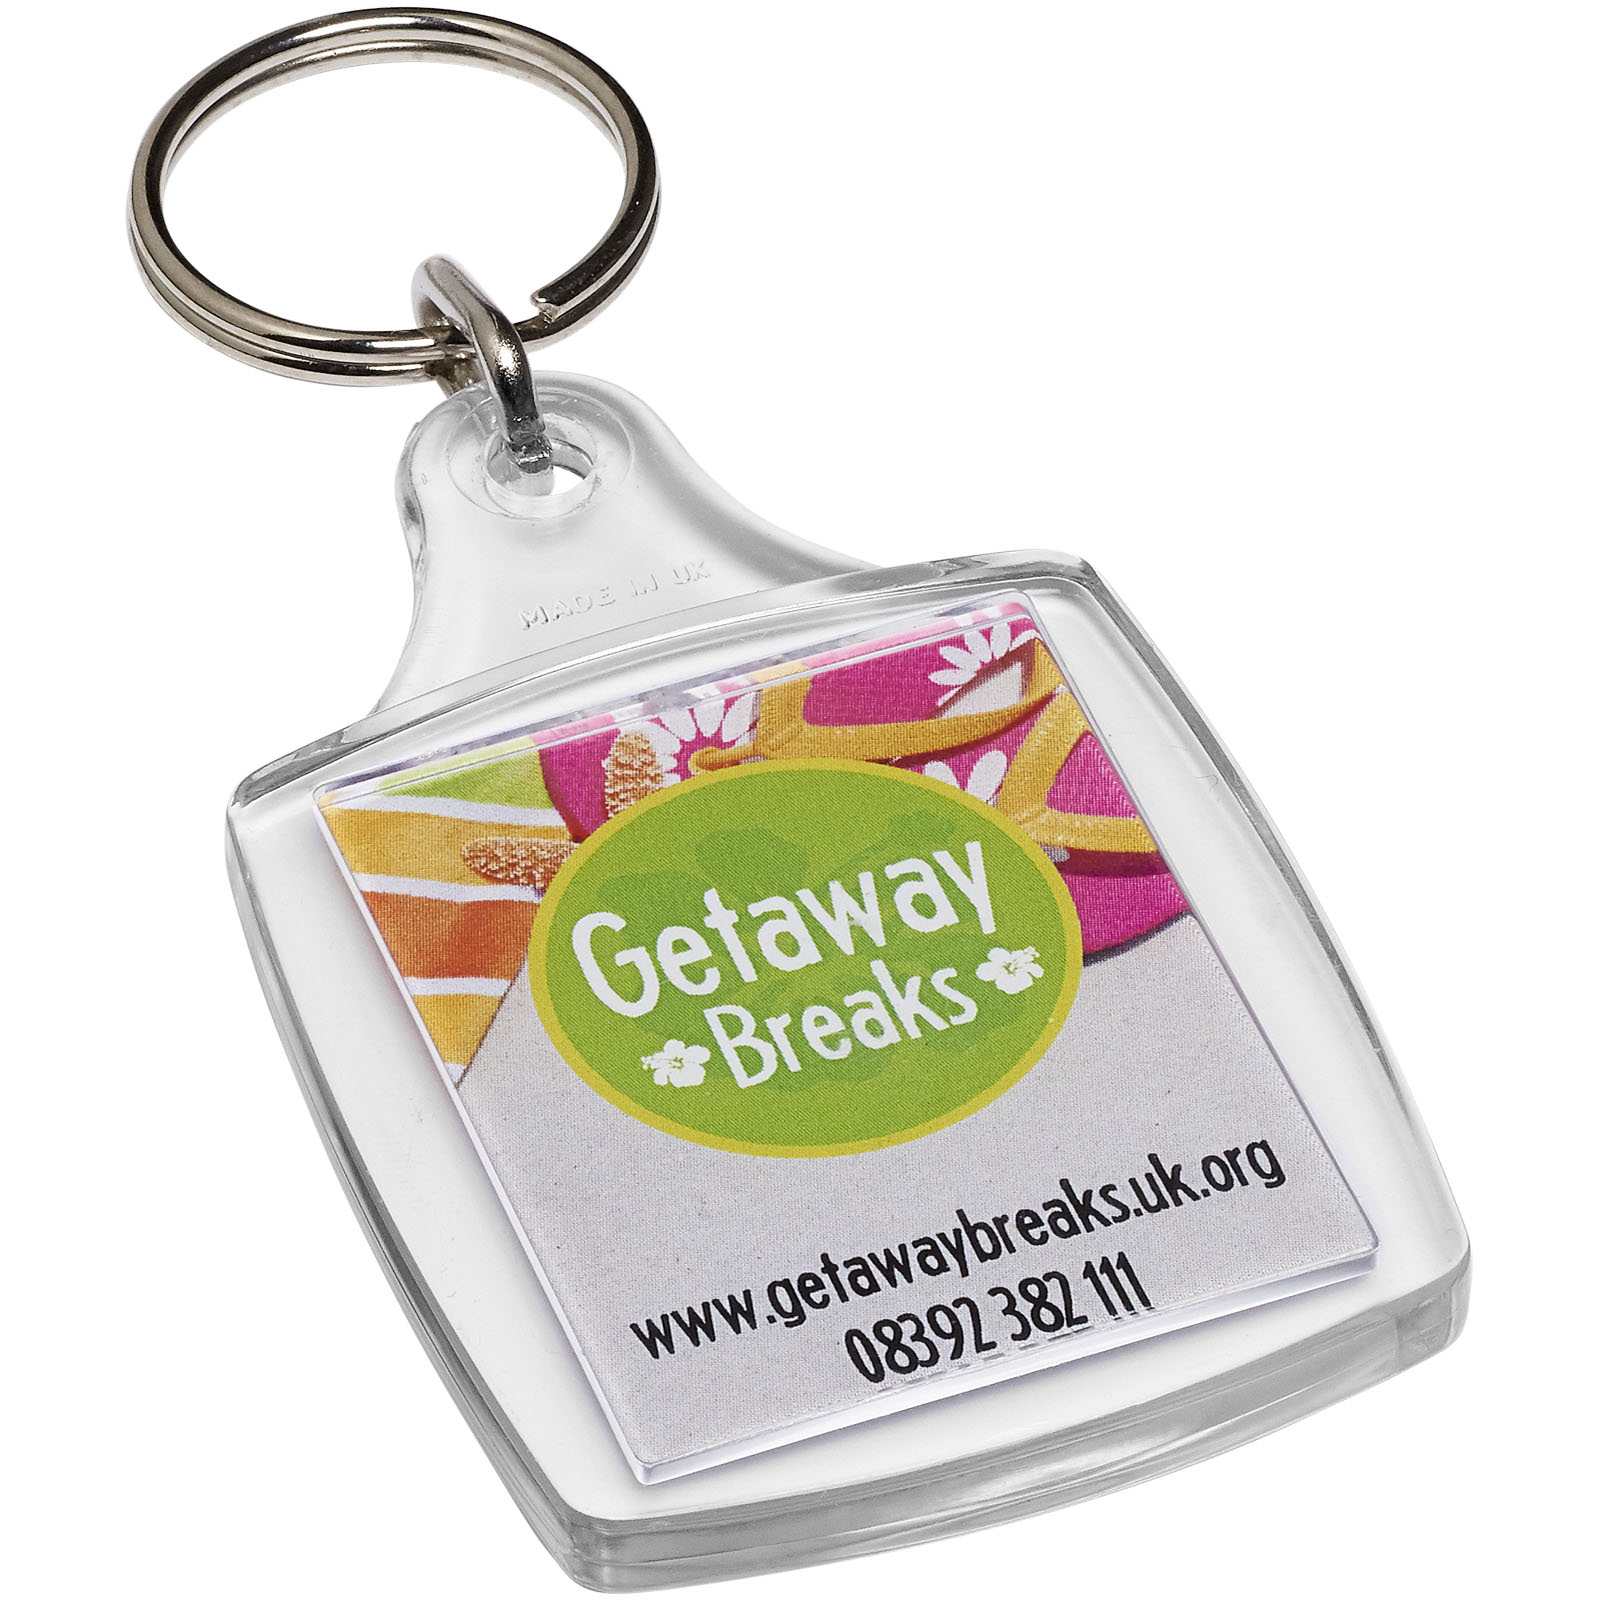 Advertising Keychains & Keyrings - Tour A5 keychain - 0